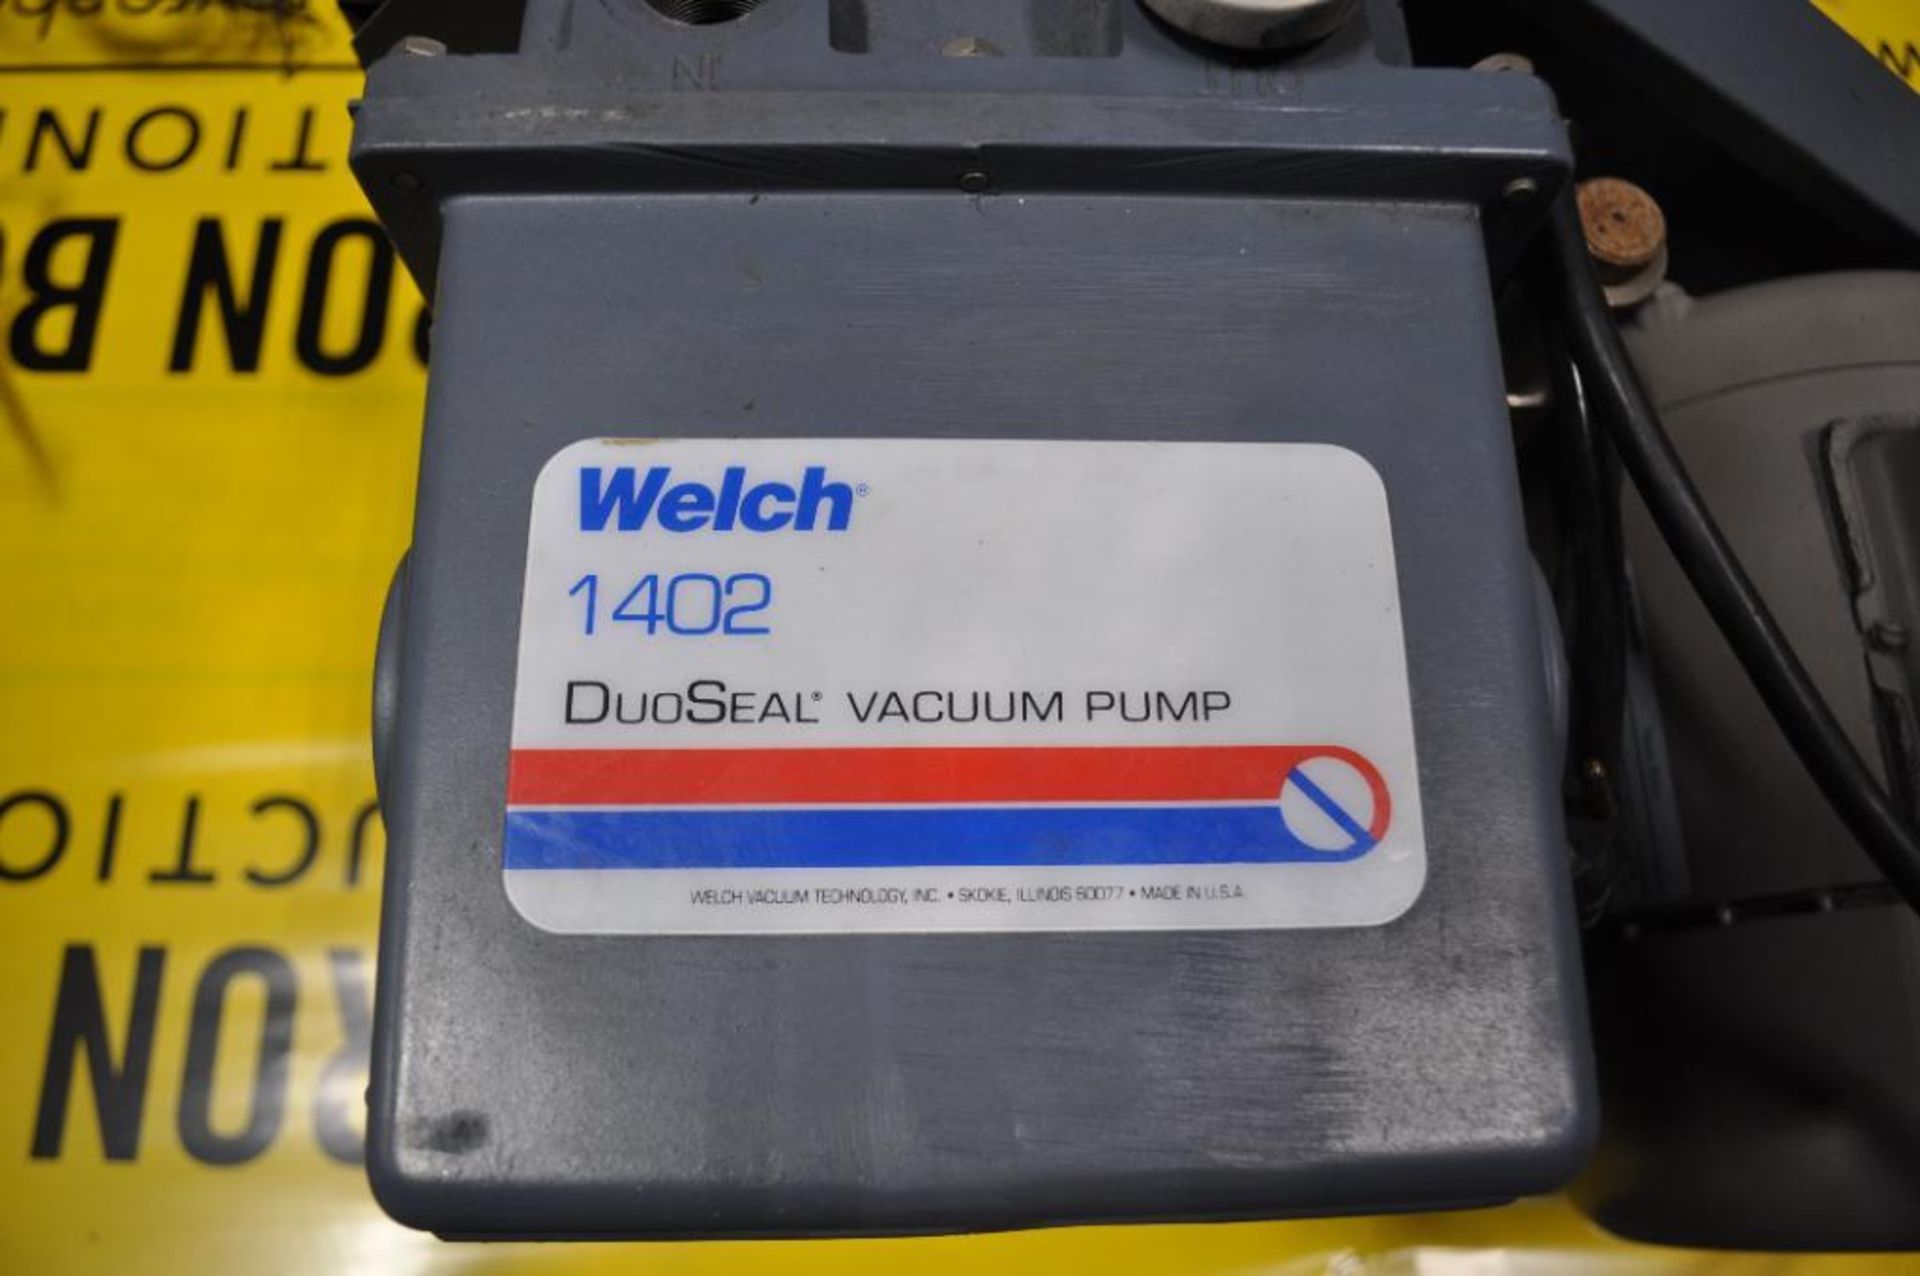 WELCH DUOSEAL VACUUM PUMP, MODEL: 1402, SINGLE PHASE - Image 3 of 3